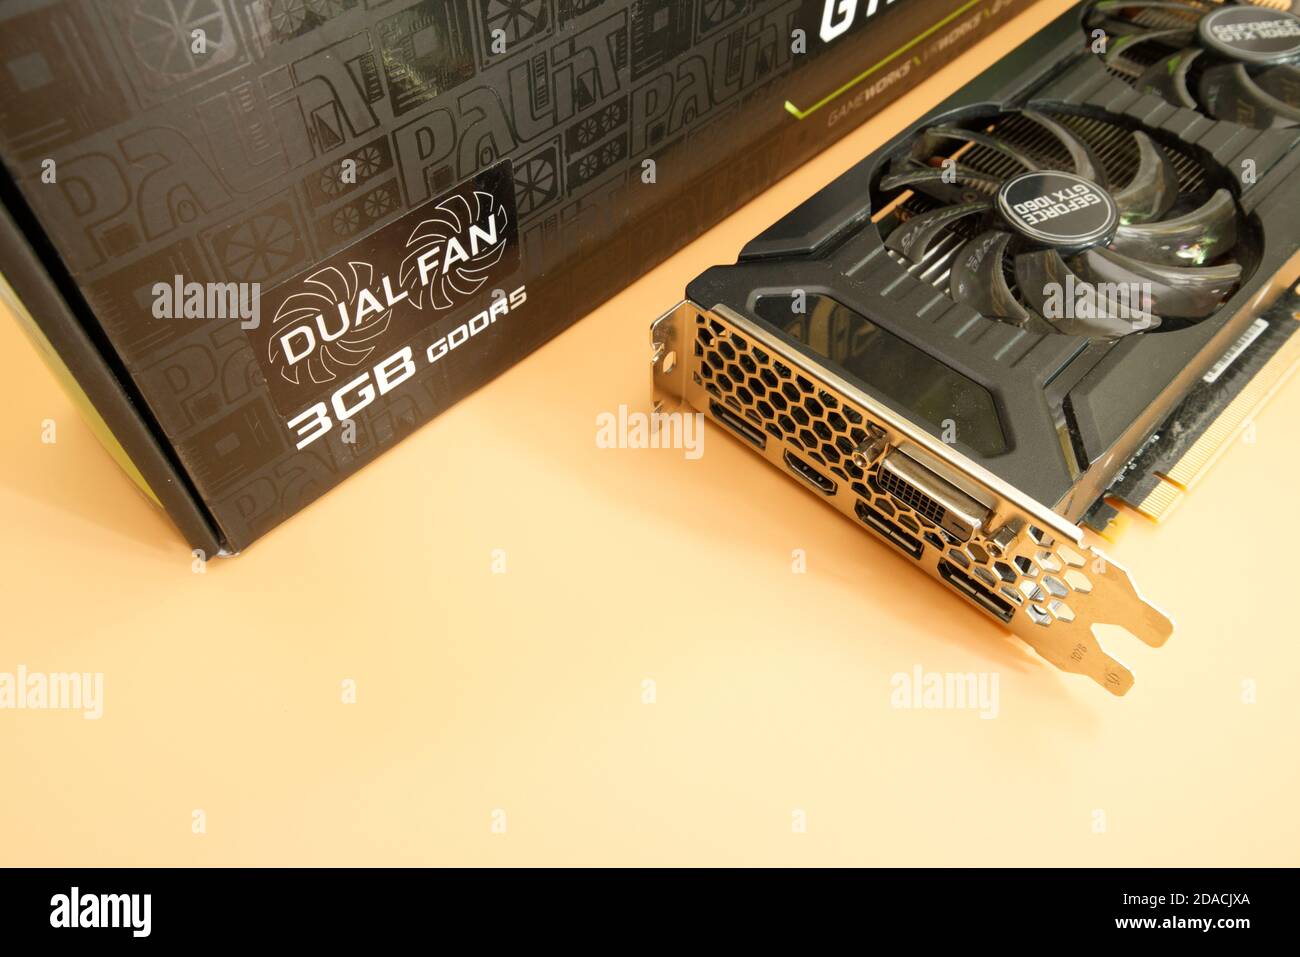 palit dual nvidia geforce gtx 1060 video card used top view Stock Photo -  Alamy